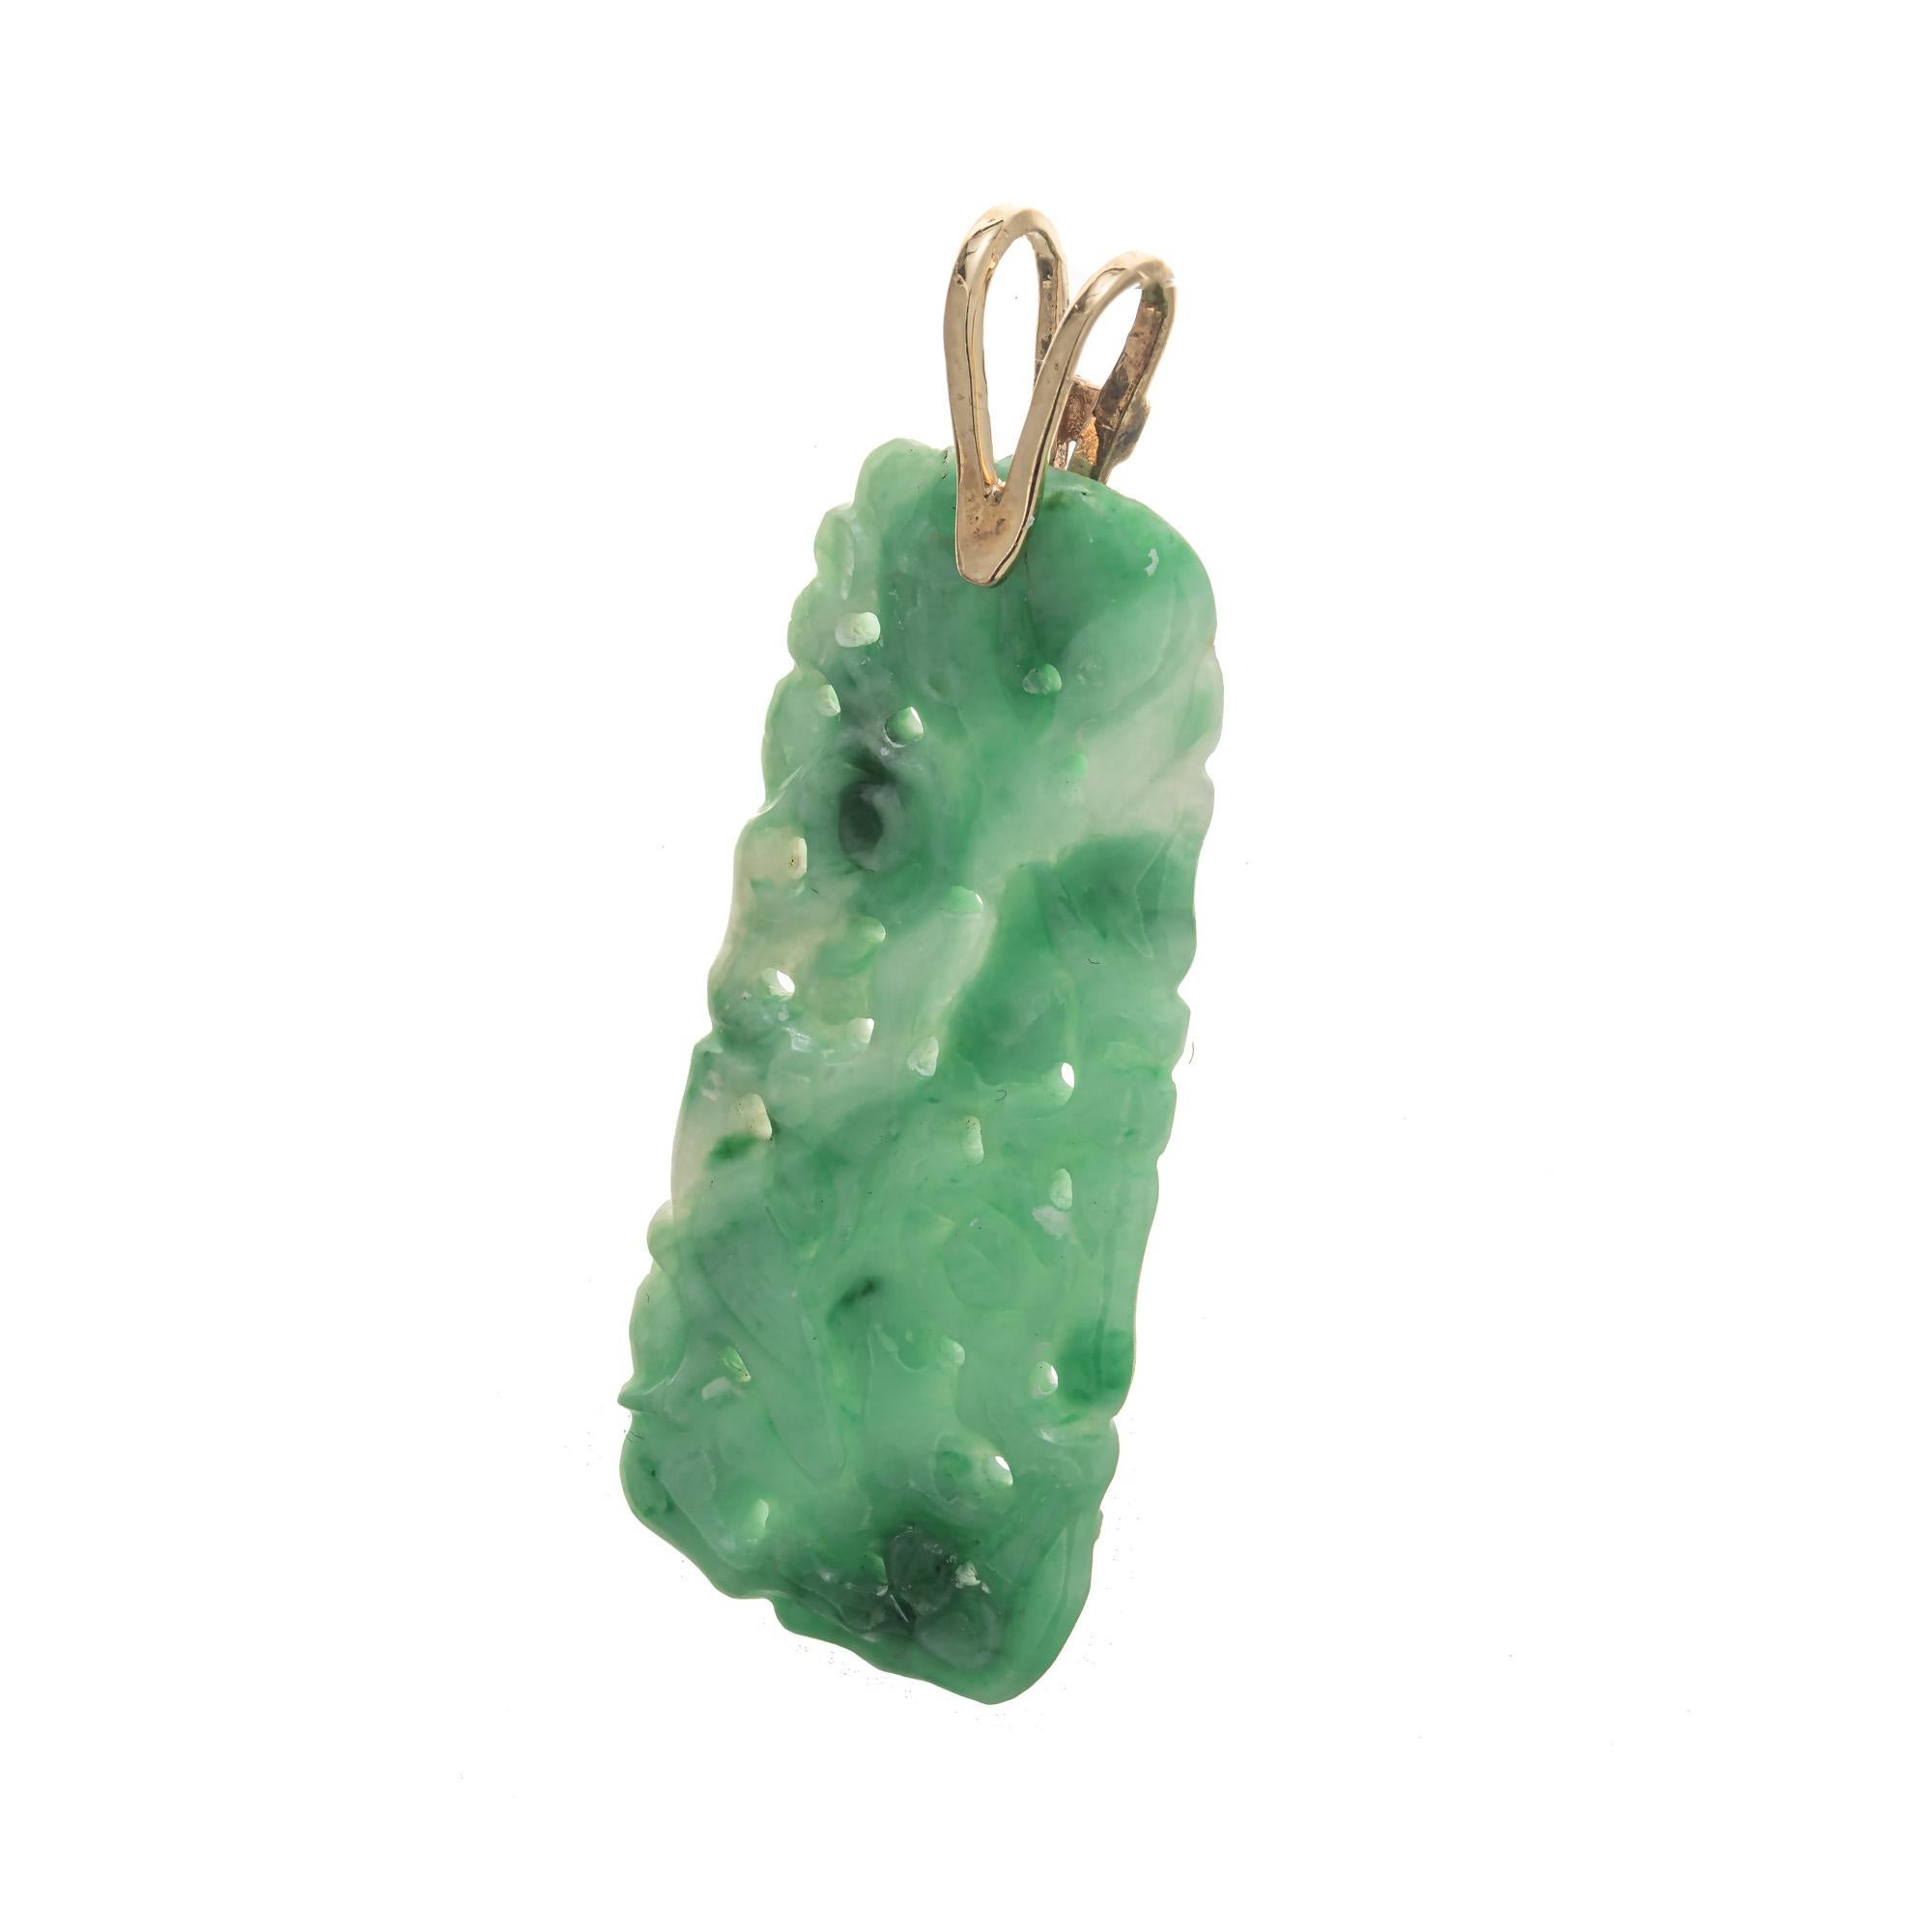 Bright green natural untreated certified jadeite jade pendant. Hand carved variegated flower jade with a 14k yellow gold bail. 

Variegated green and white rectangular Jadeite jade carving 42.9 x 19.2 x 3.3mm. Natural color, no dye no enhancement.